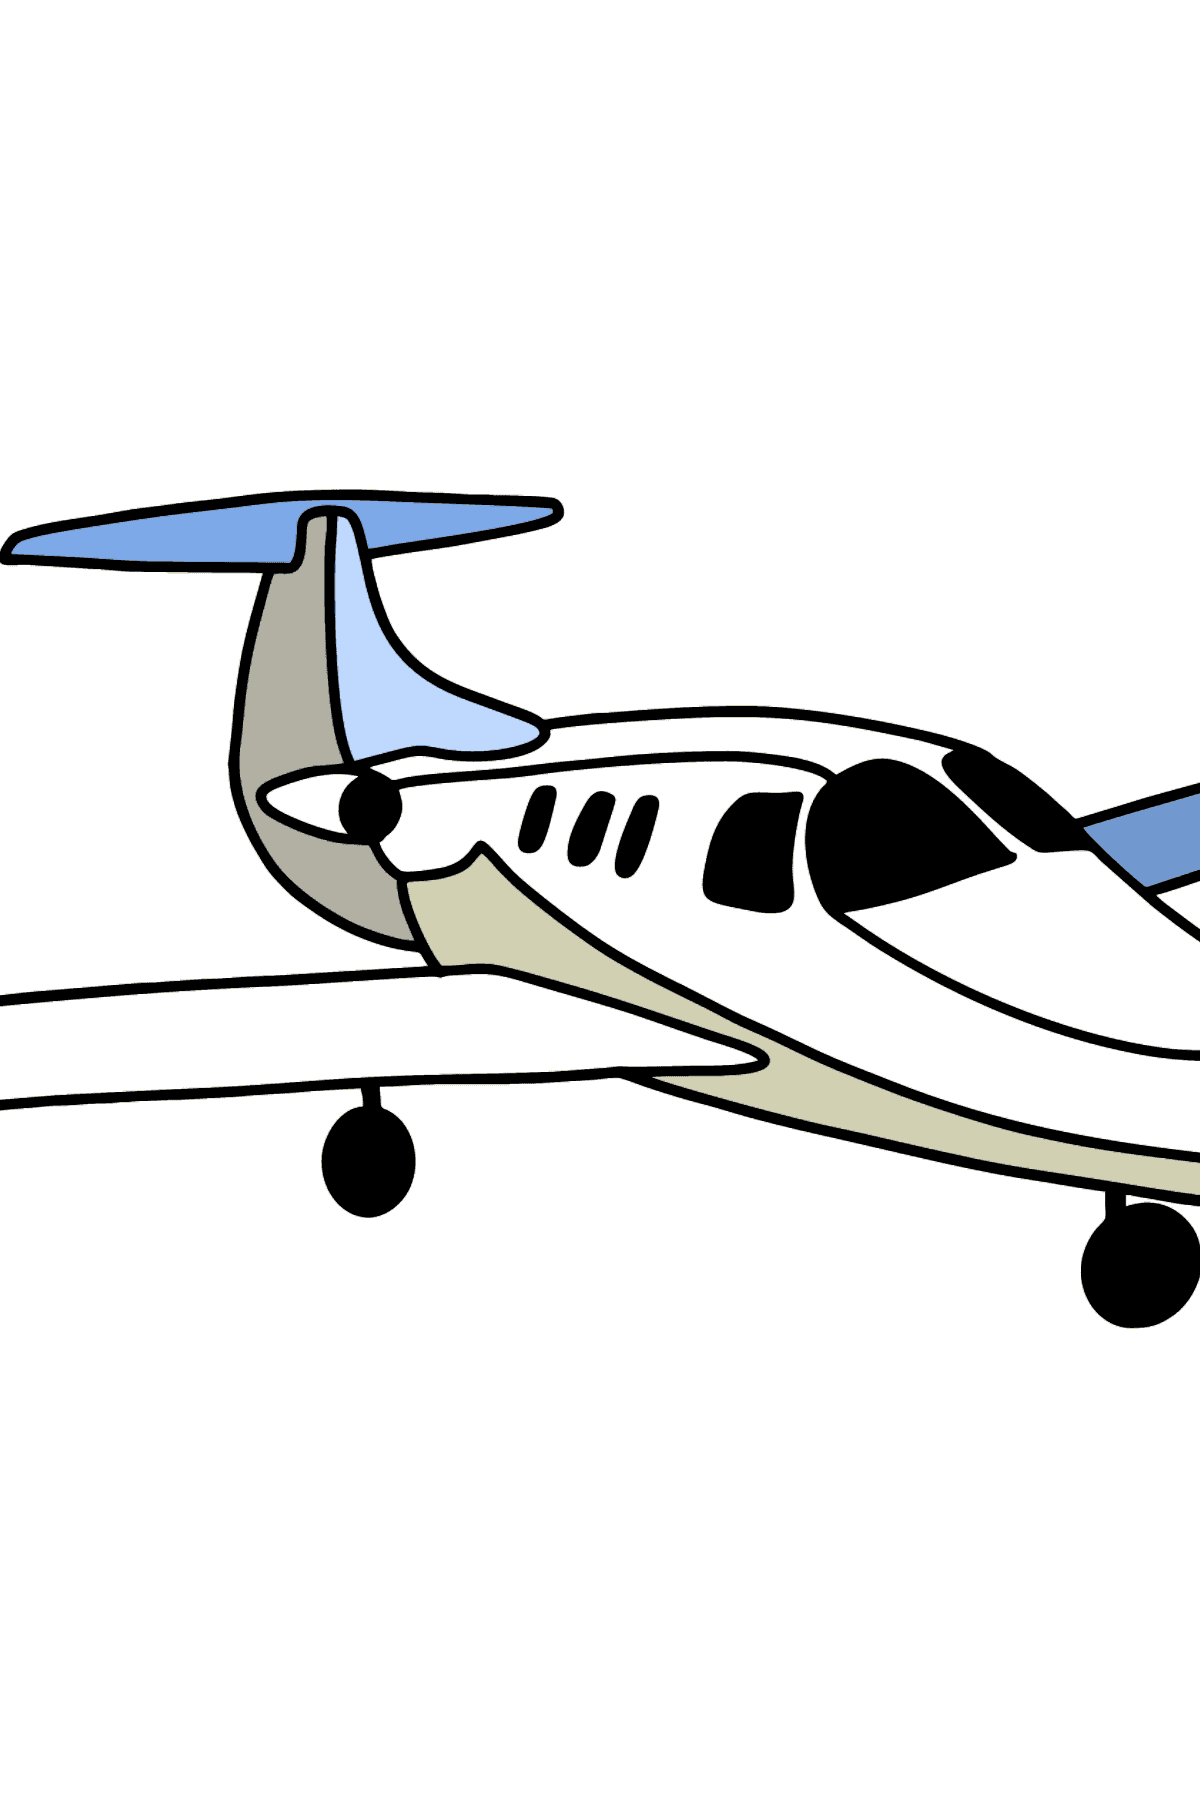 Airplane Private Jet coloring page - Coloring Pages for Kids